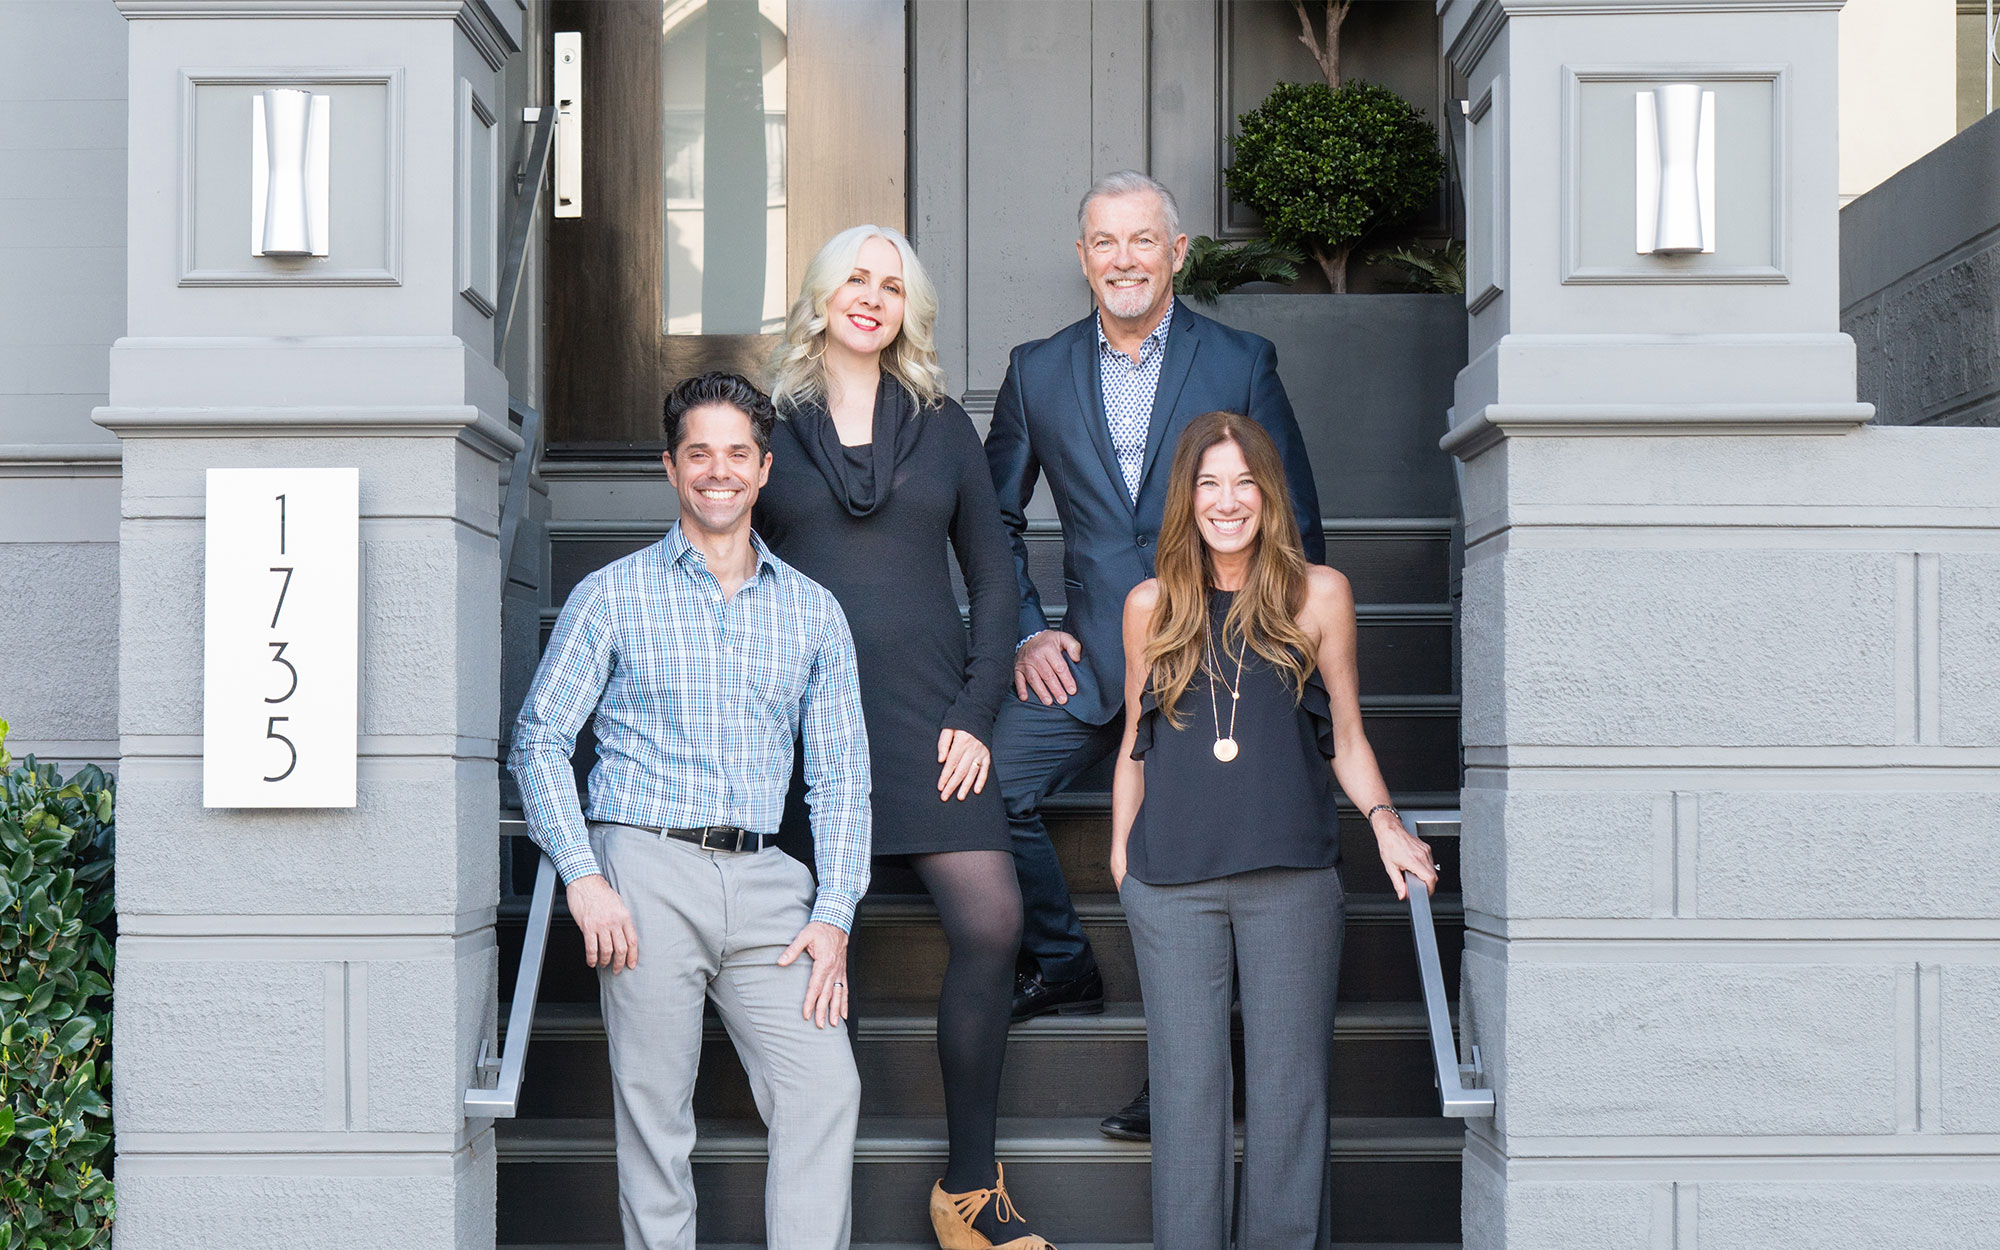 The Real SF Properties team members standing in front of a house